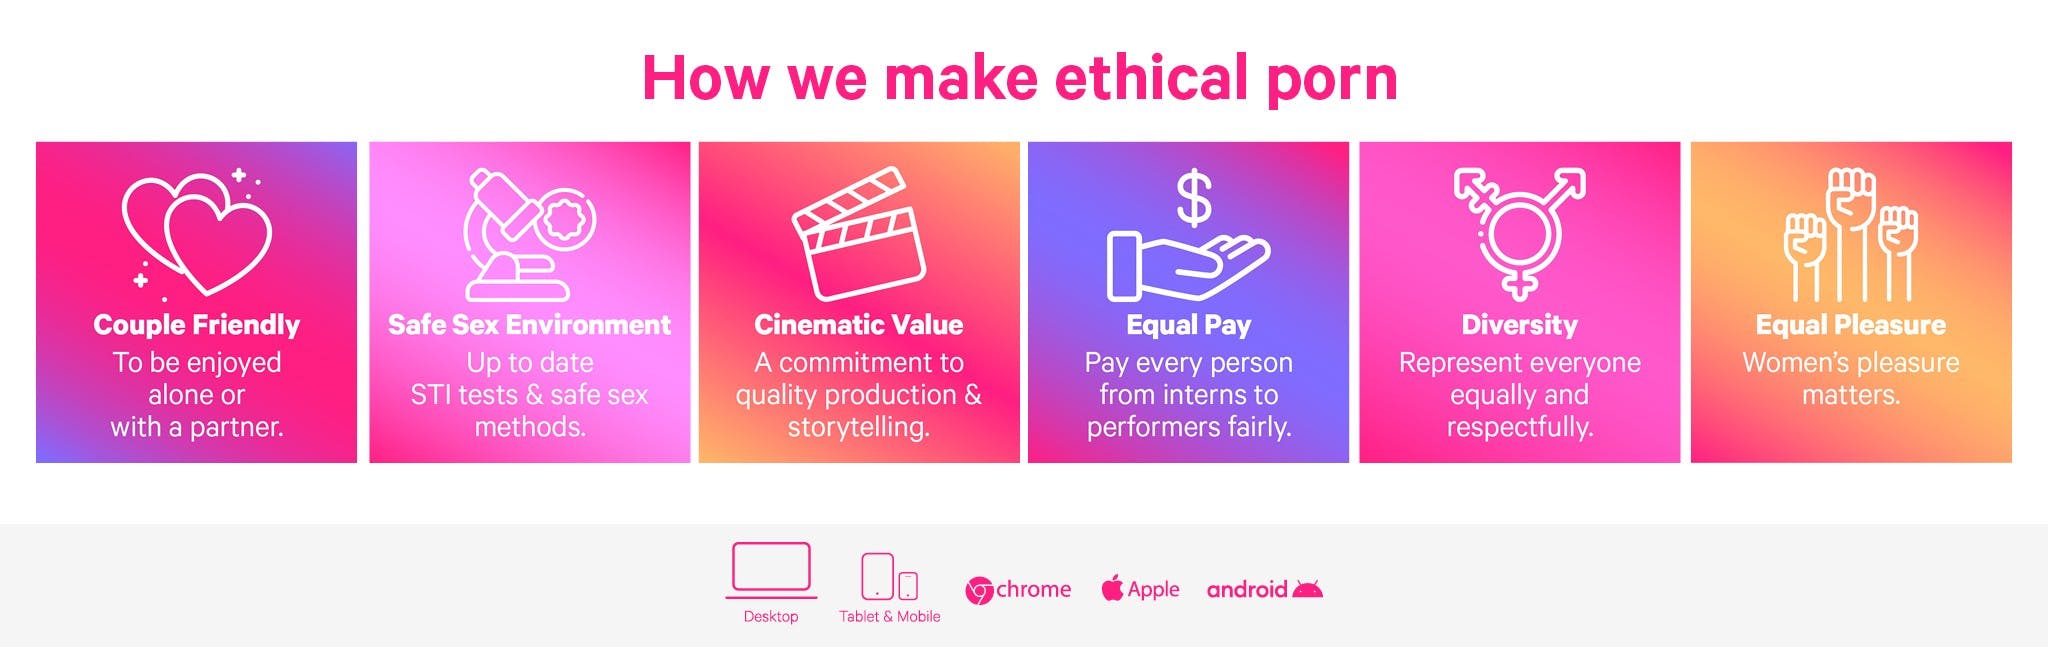 XC - How we make ethical porn